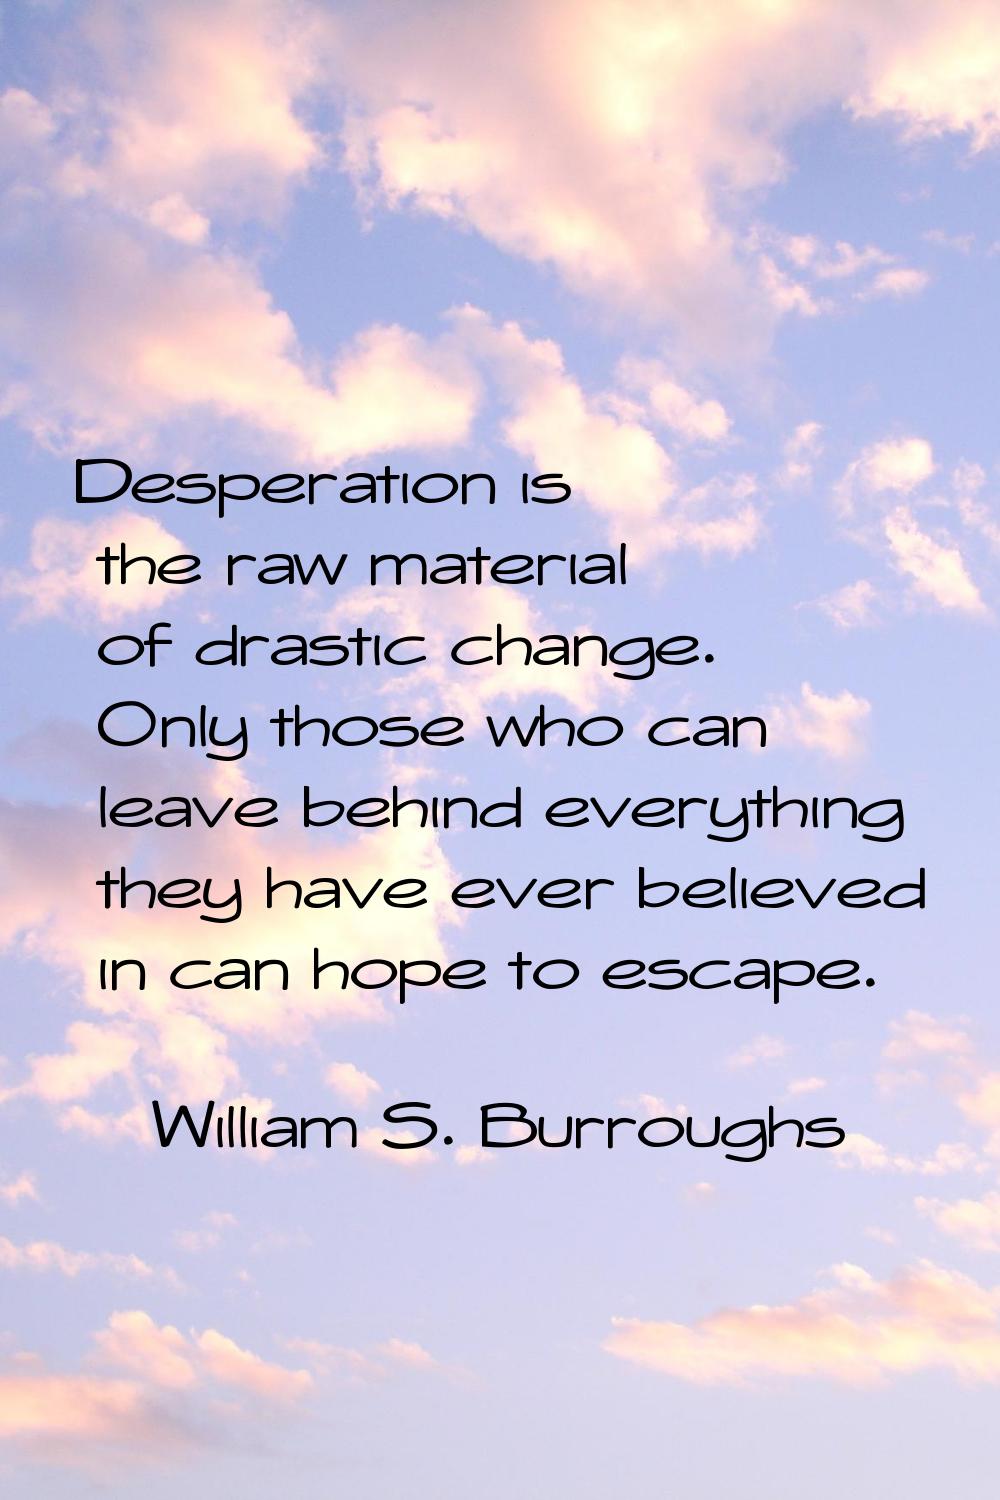 Desperation is the raw material of drastic change. Only those who can leave behind everything they 